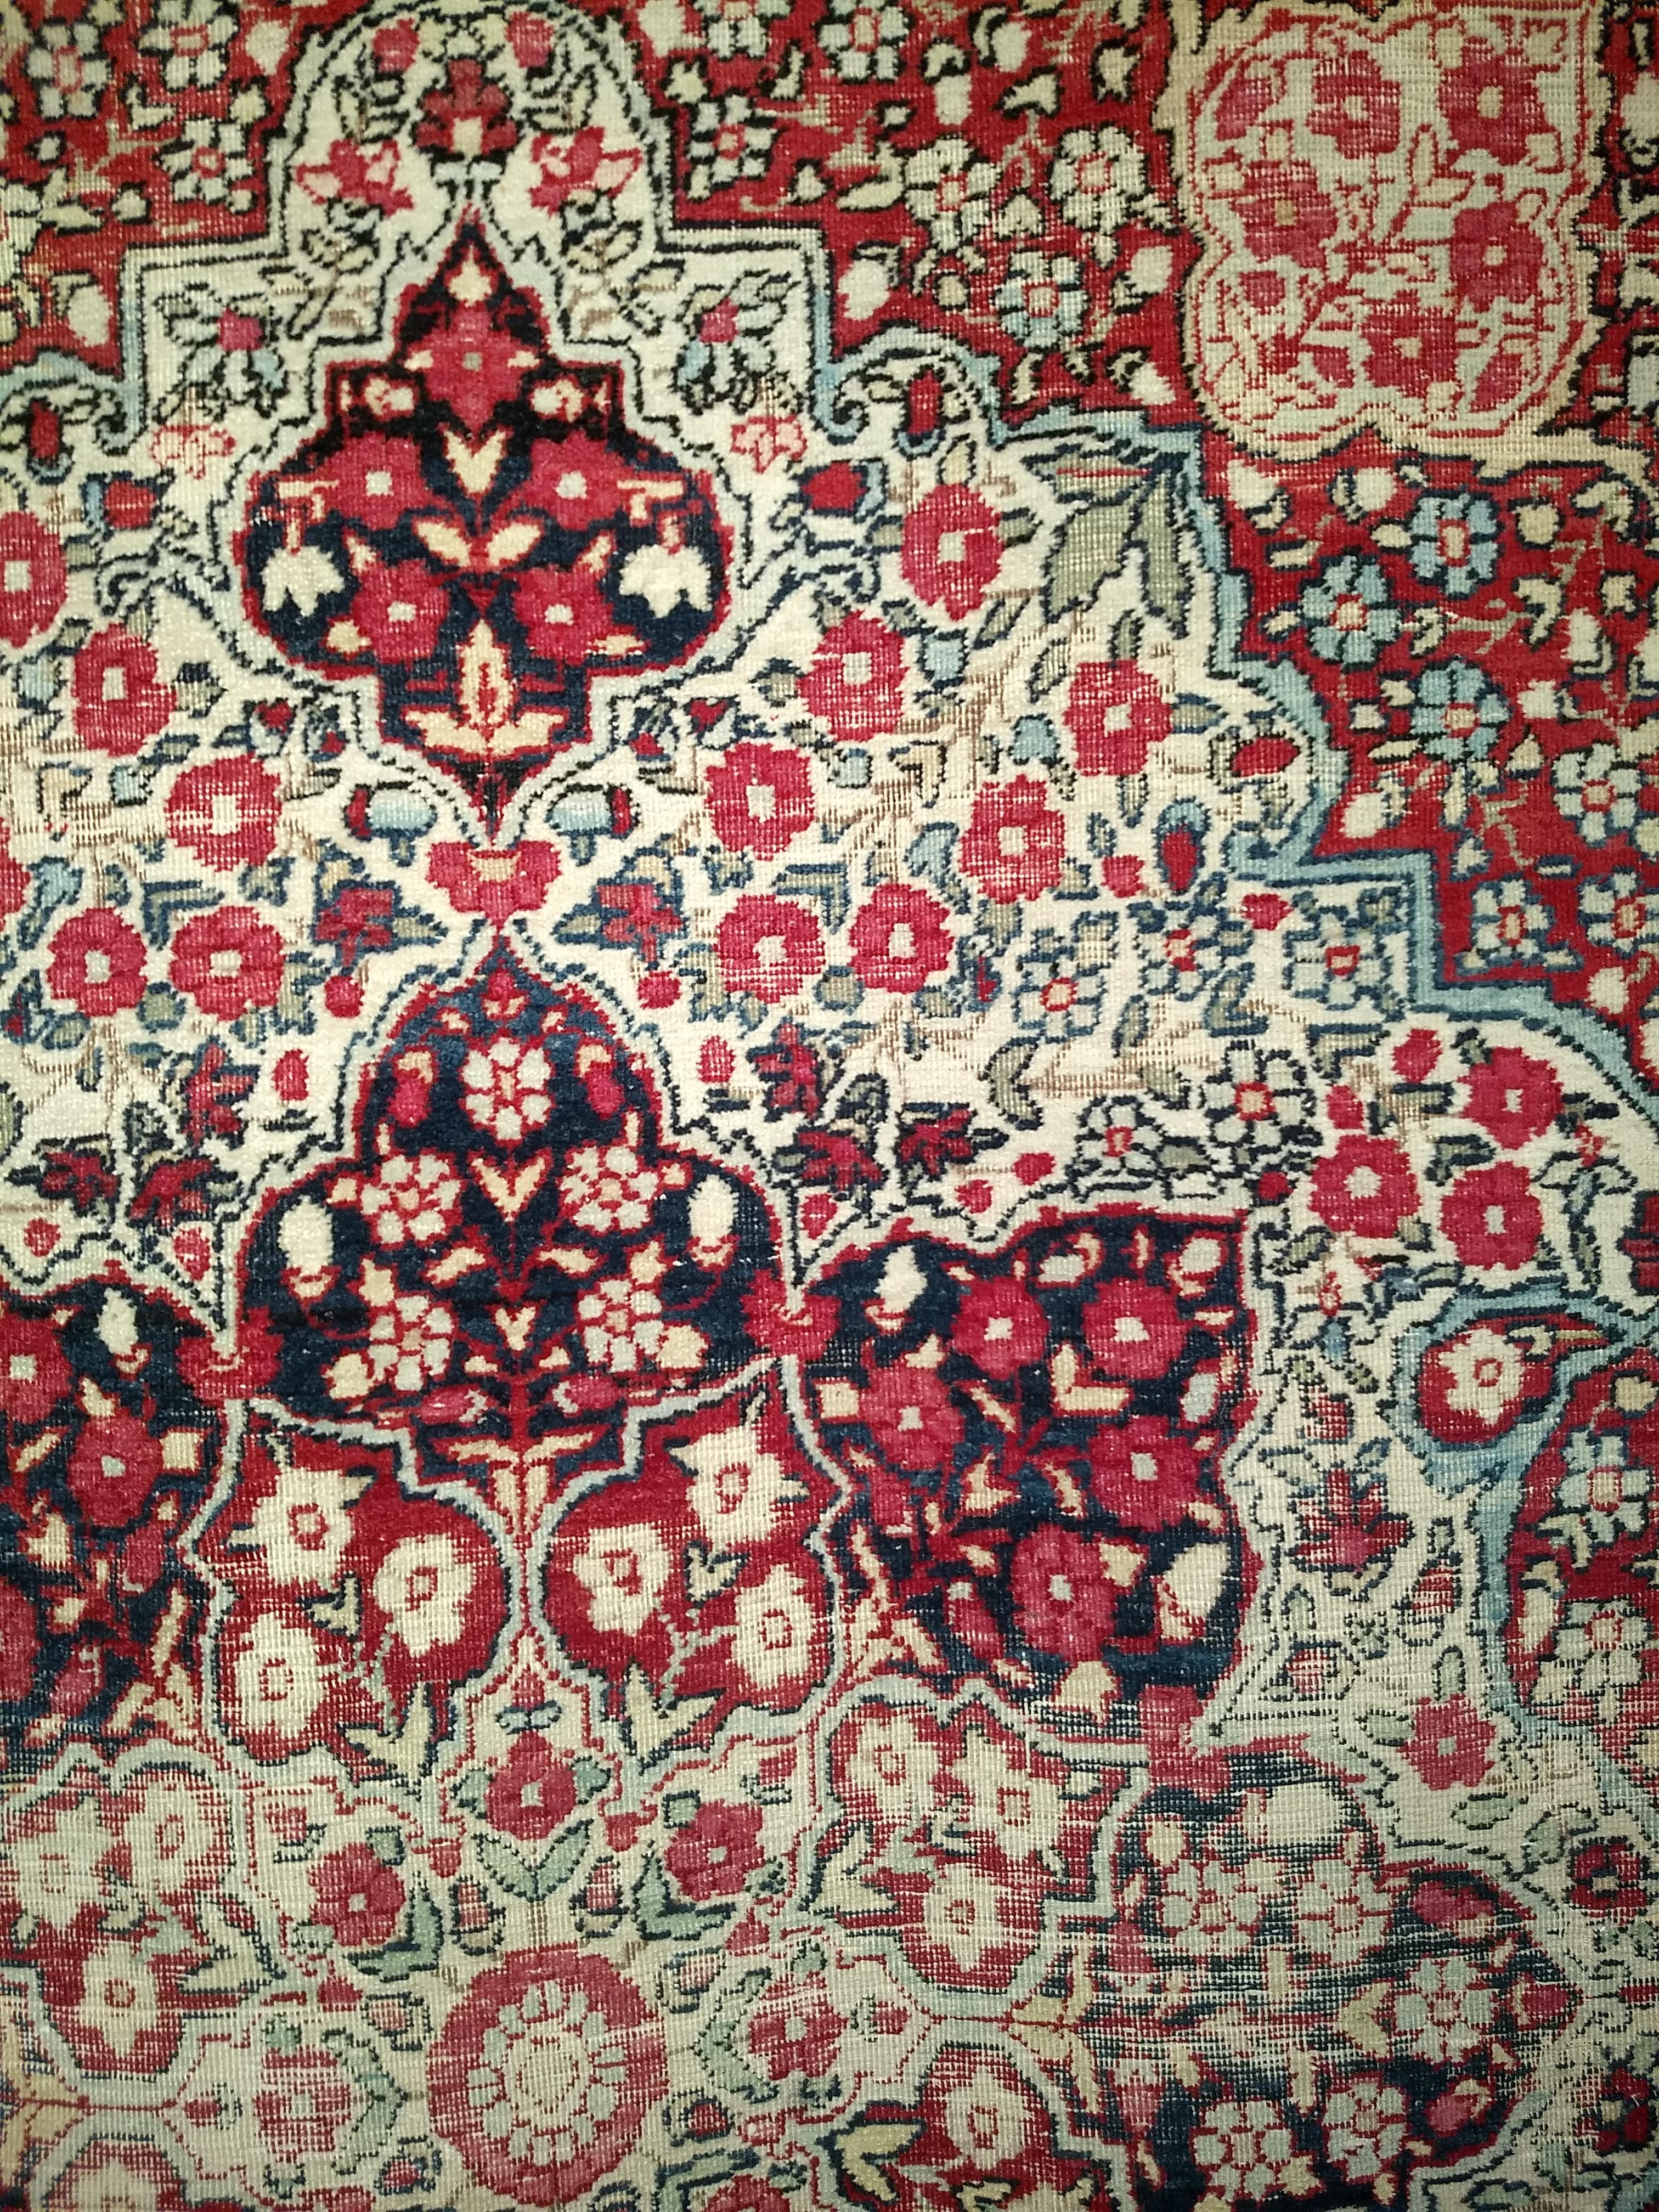 19th Century Persian Kerman Lavar Area Rug in Floral Design in Red, Ivory, Black In Good Condition For Sale In Barrington, IL